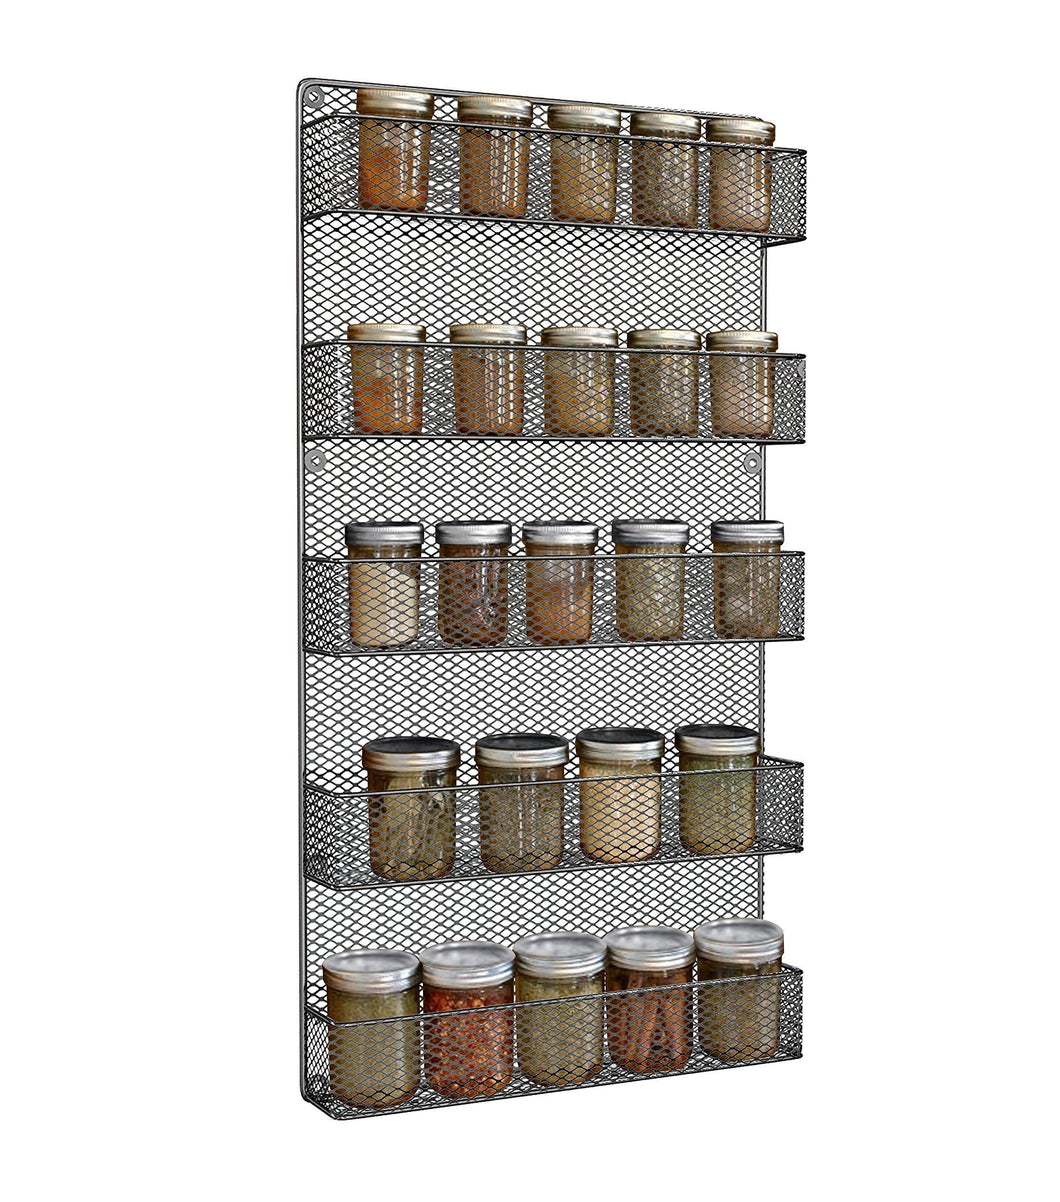 Great spice rack wall mount spice rack organizer use as a wall mounted spice rack great storage capacity for kitchen spicy shelf the best spice rack 5 tier shelves